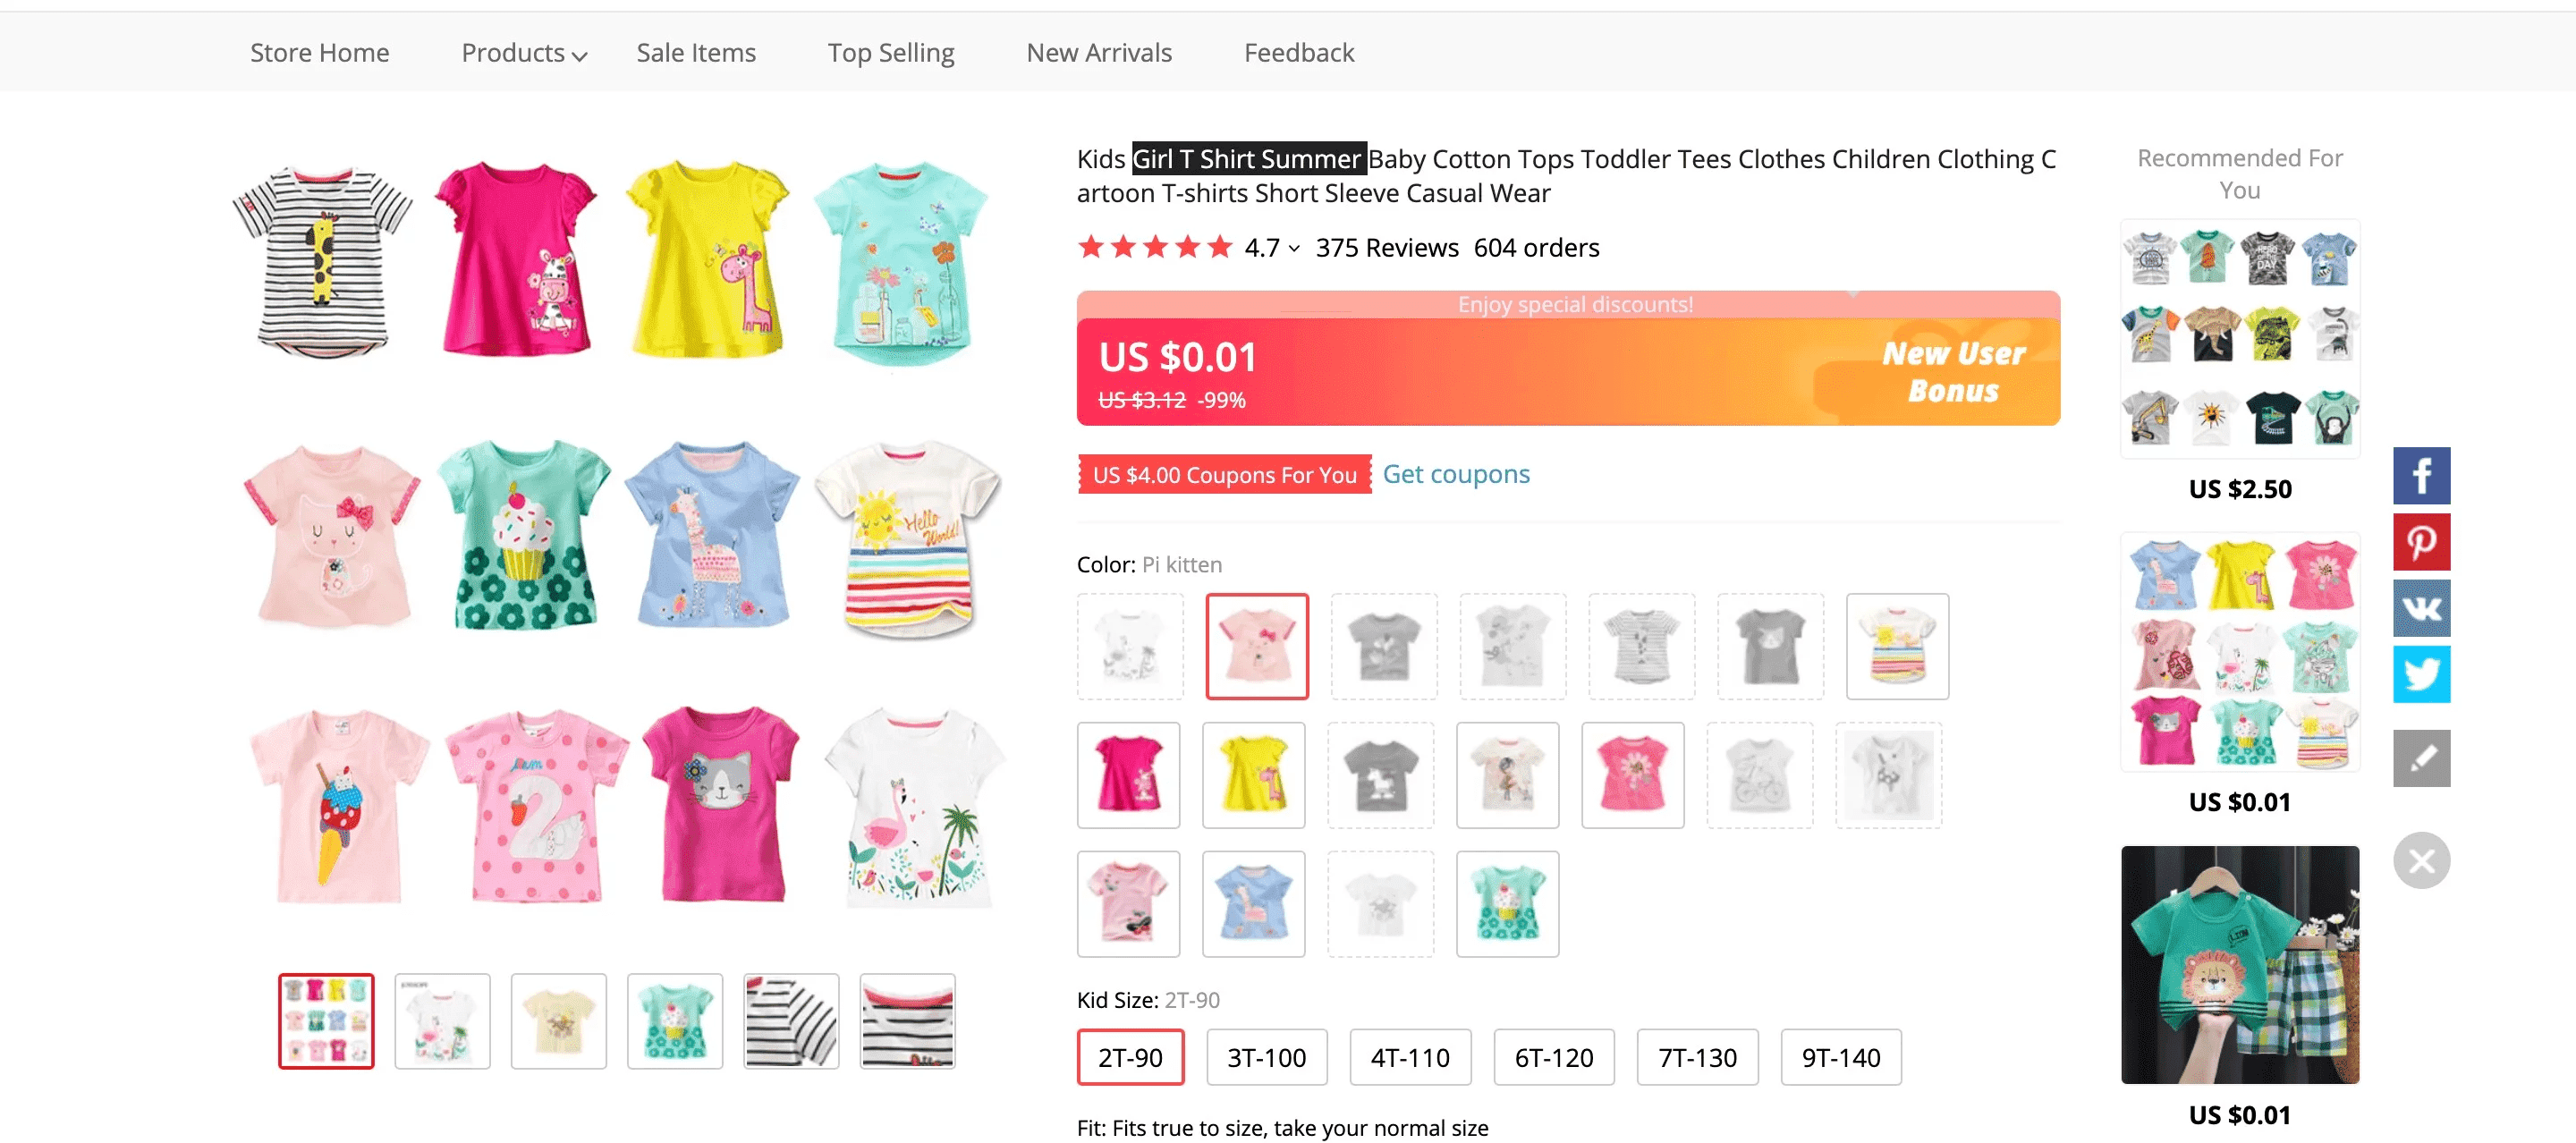 Aliexpress trending products for dropshipping: Toys, Kids & Babies